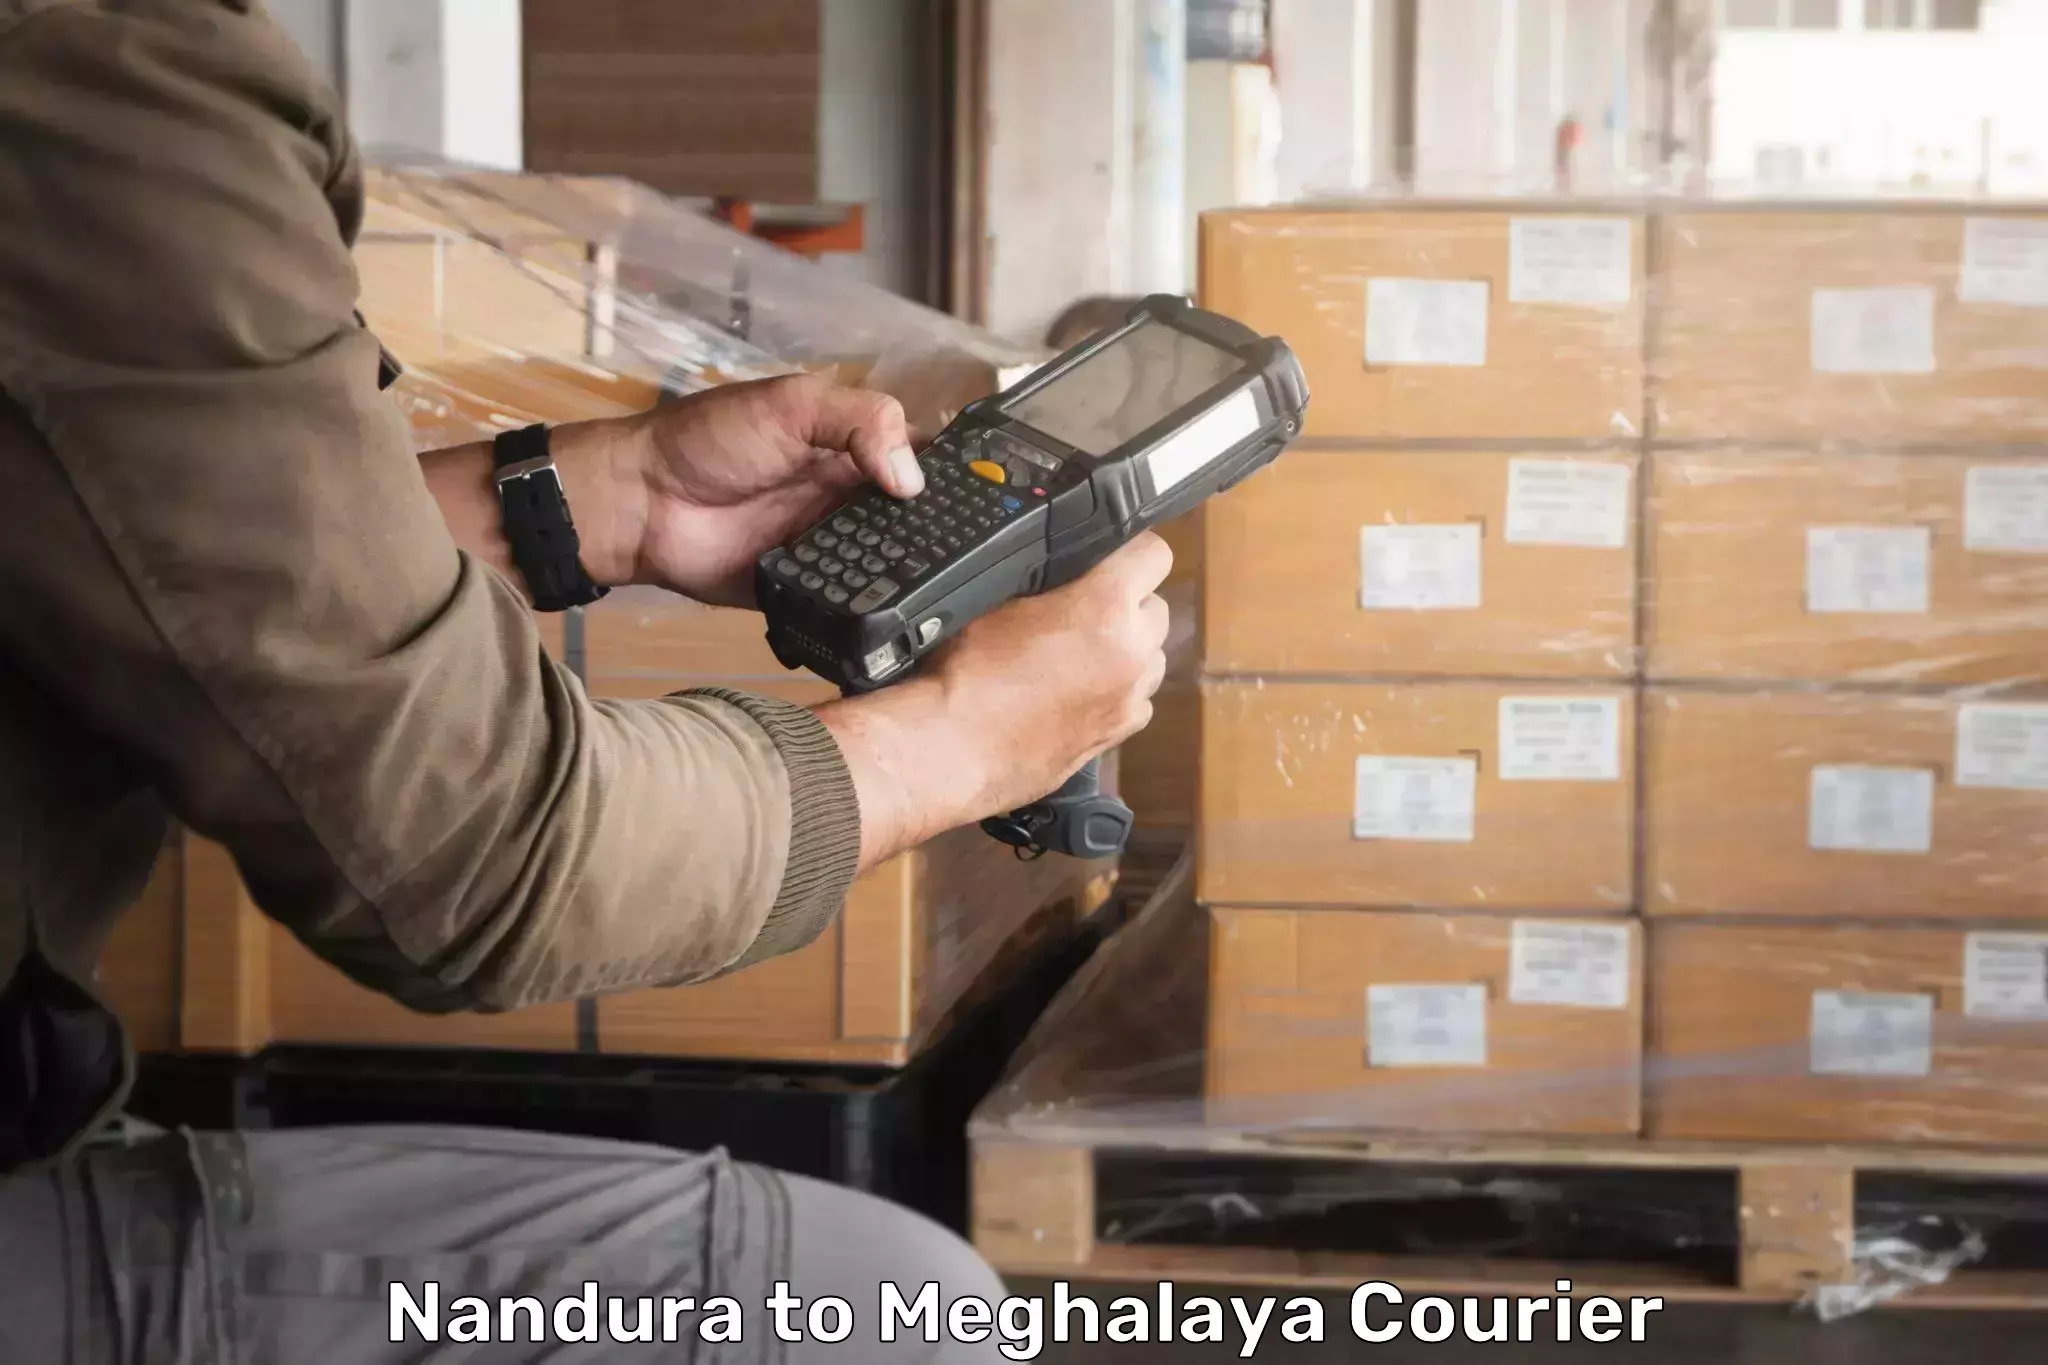 On-call courier service Nandura to Umsaw